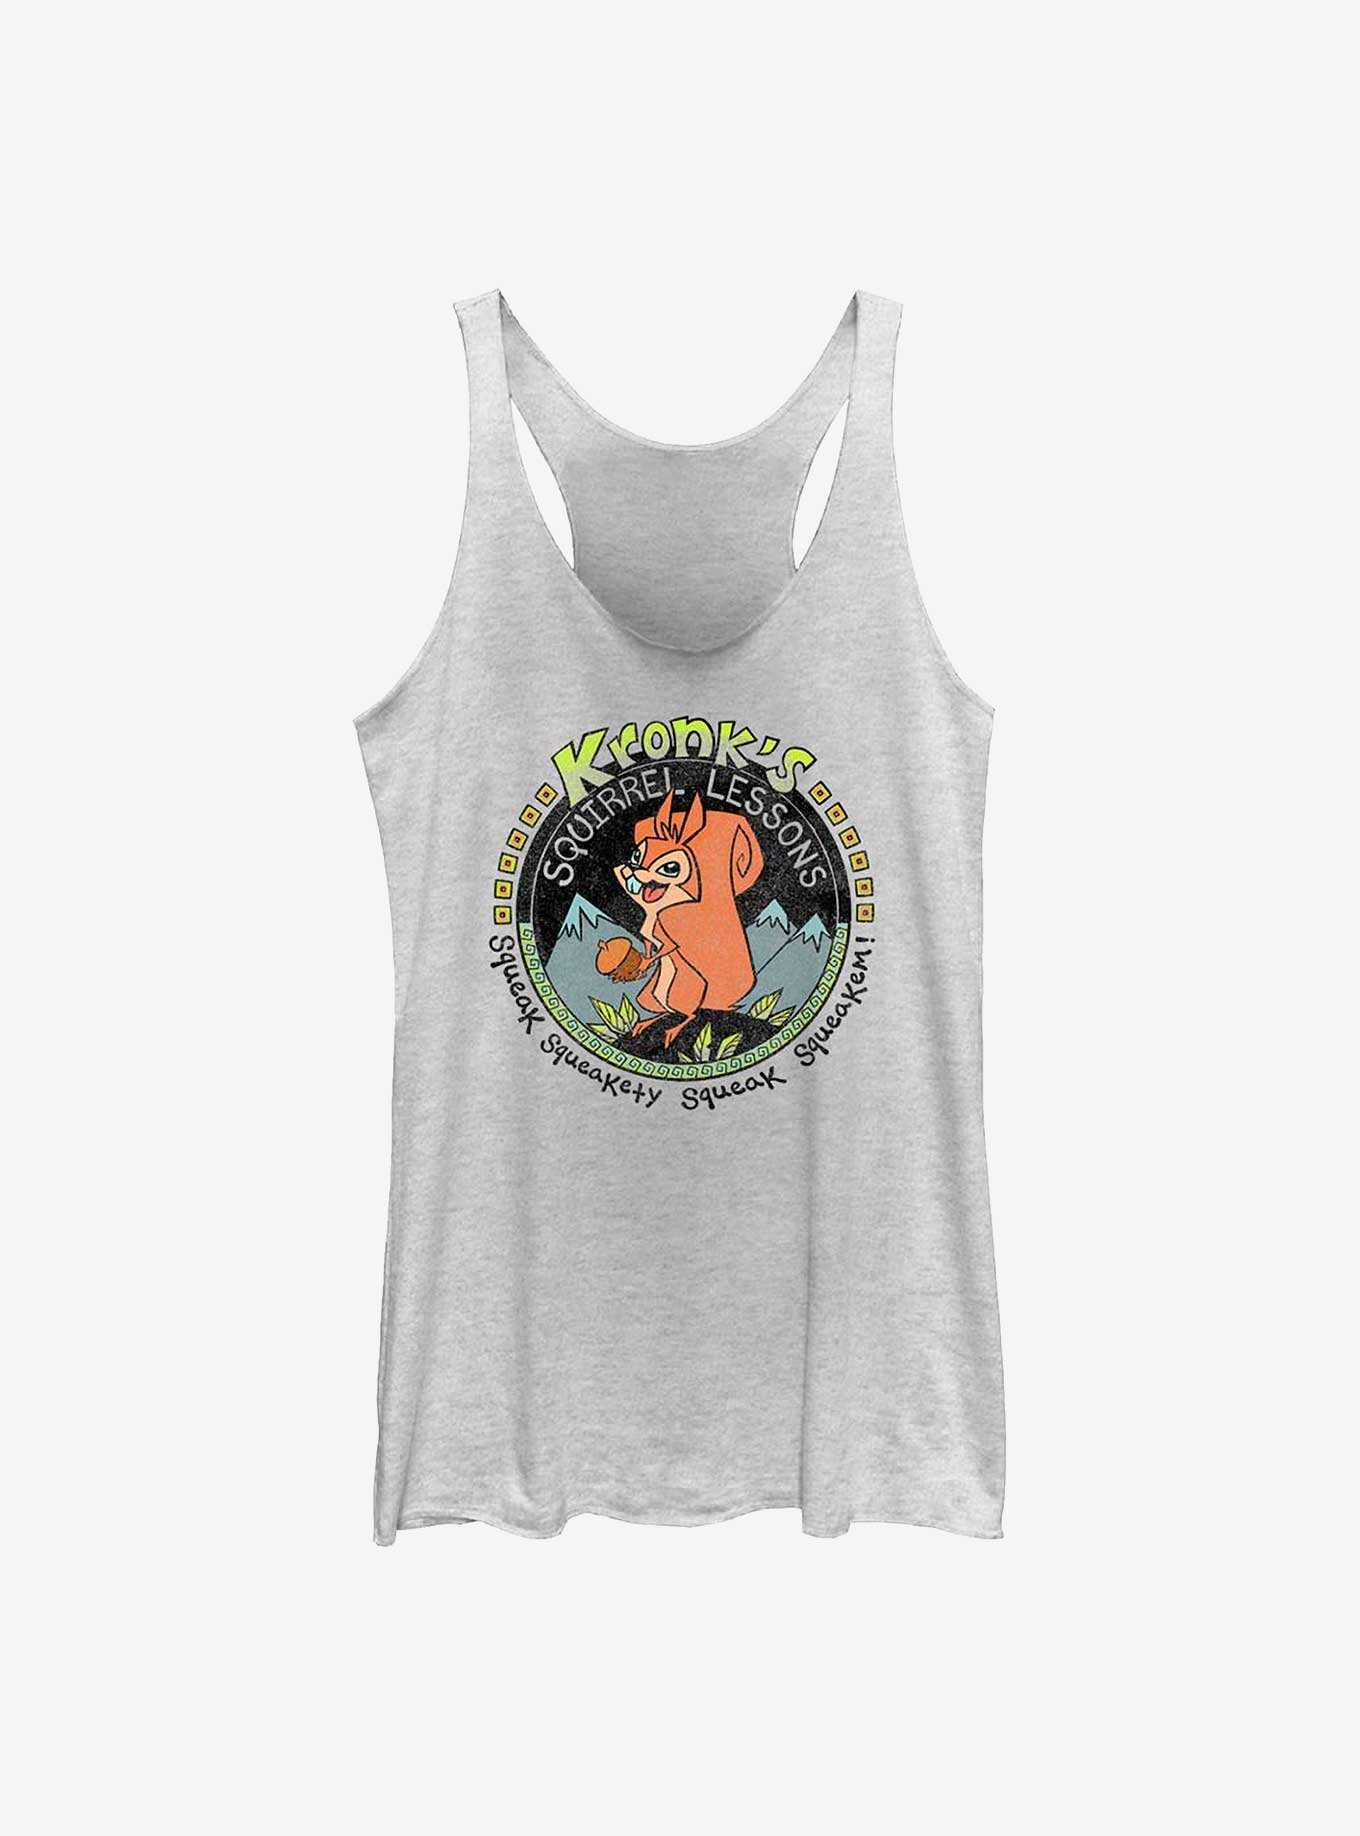 Disney The Emperor's New Groove Kronk's Squirrel Lessons Girls Tank, , hi-res